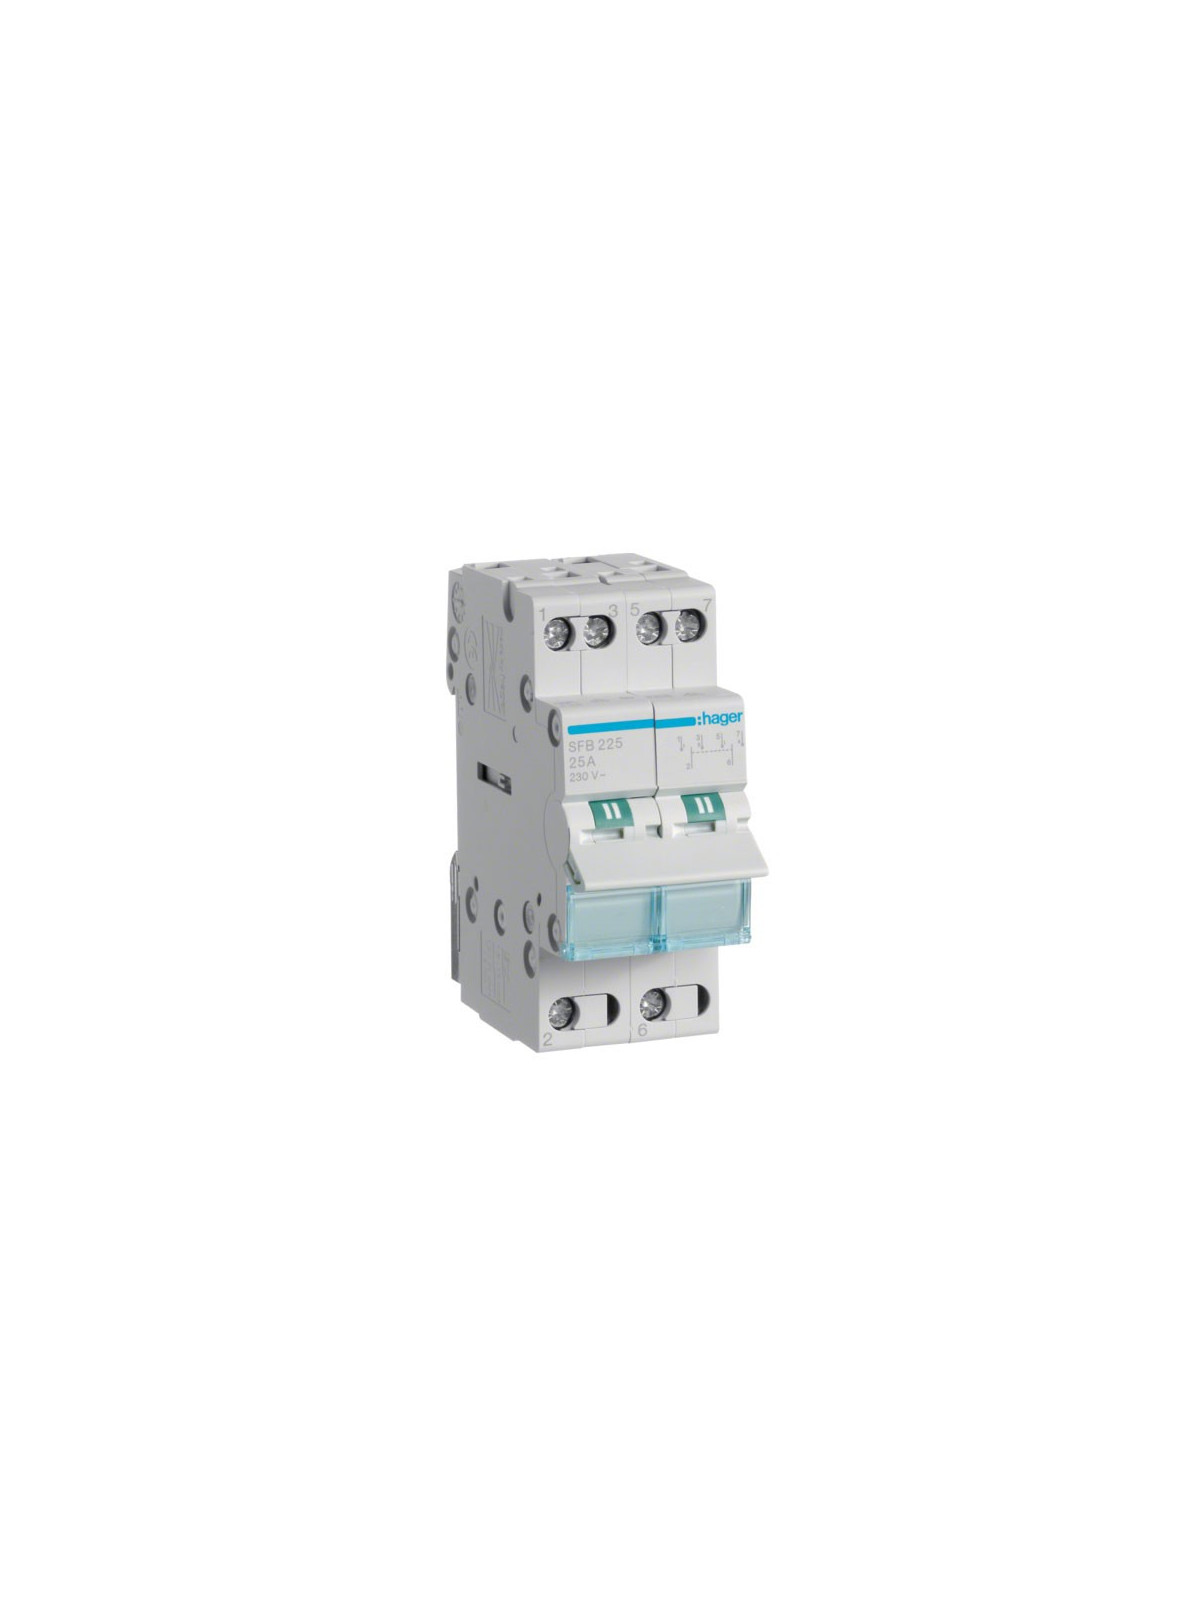 Modular change-over switch 2x 25A